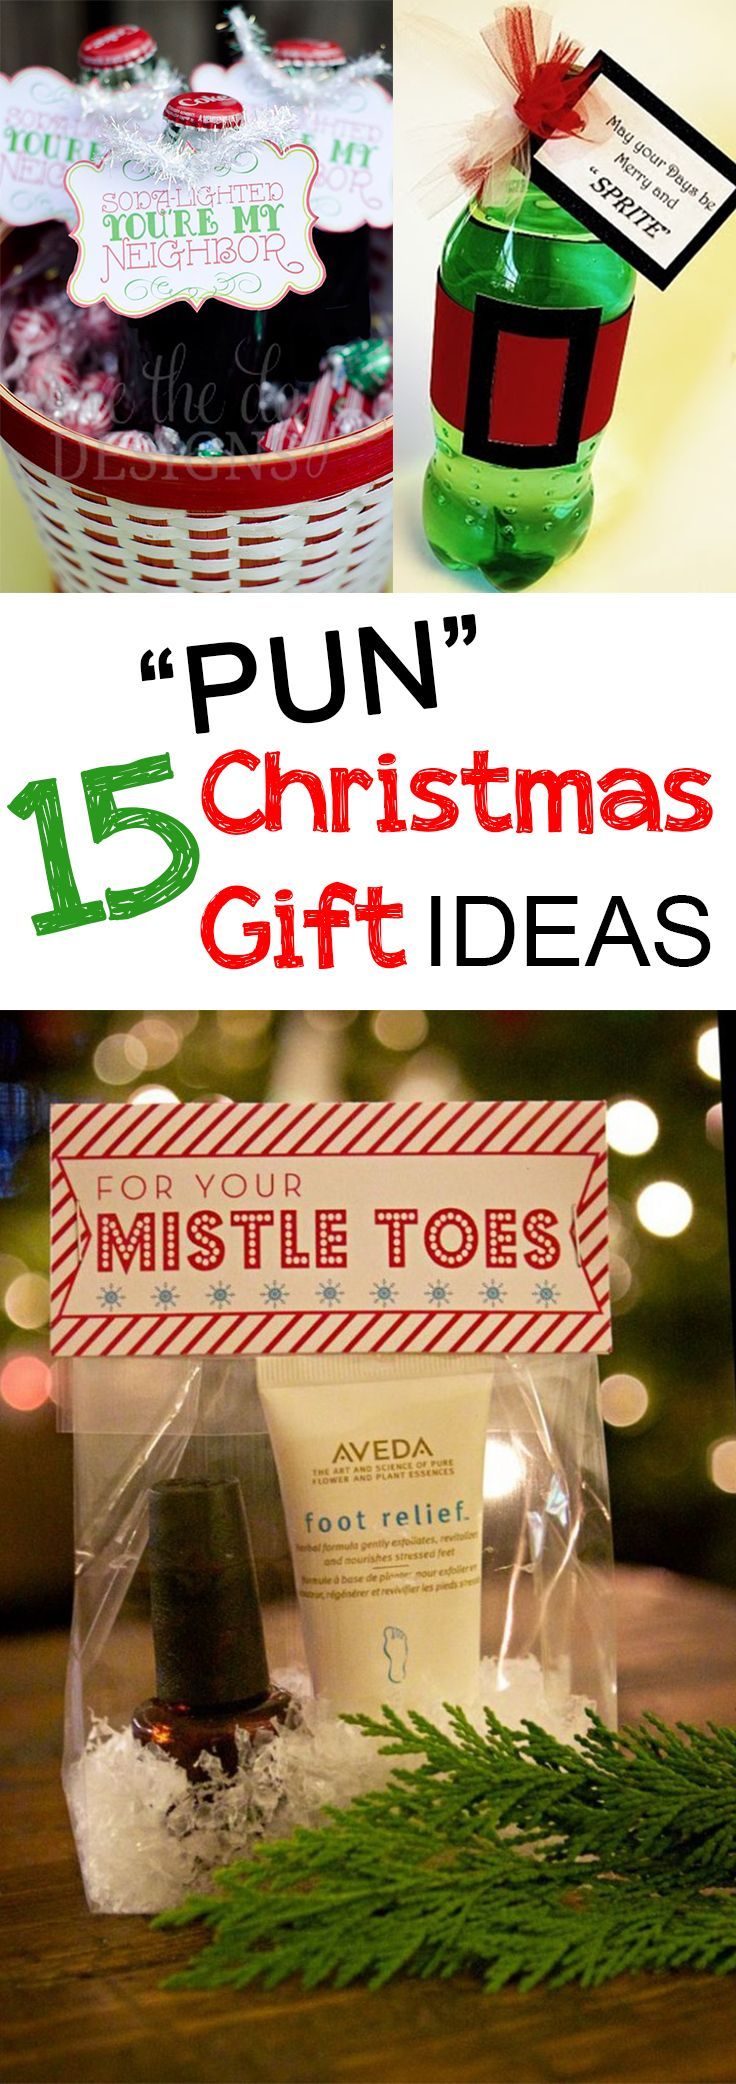 Who doesnt love a good pun? These easy Christmas ideas for your friends and neighbors will be sur